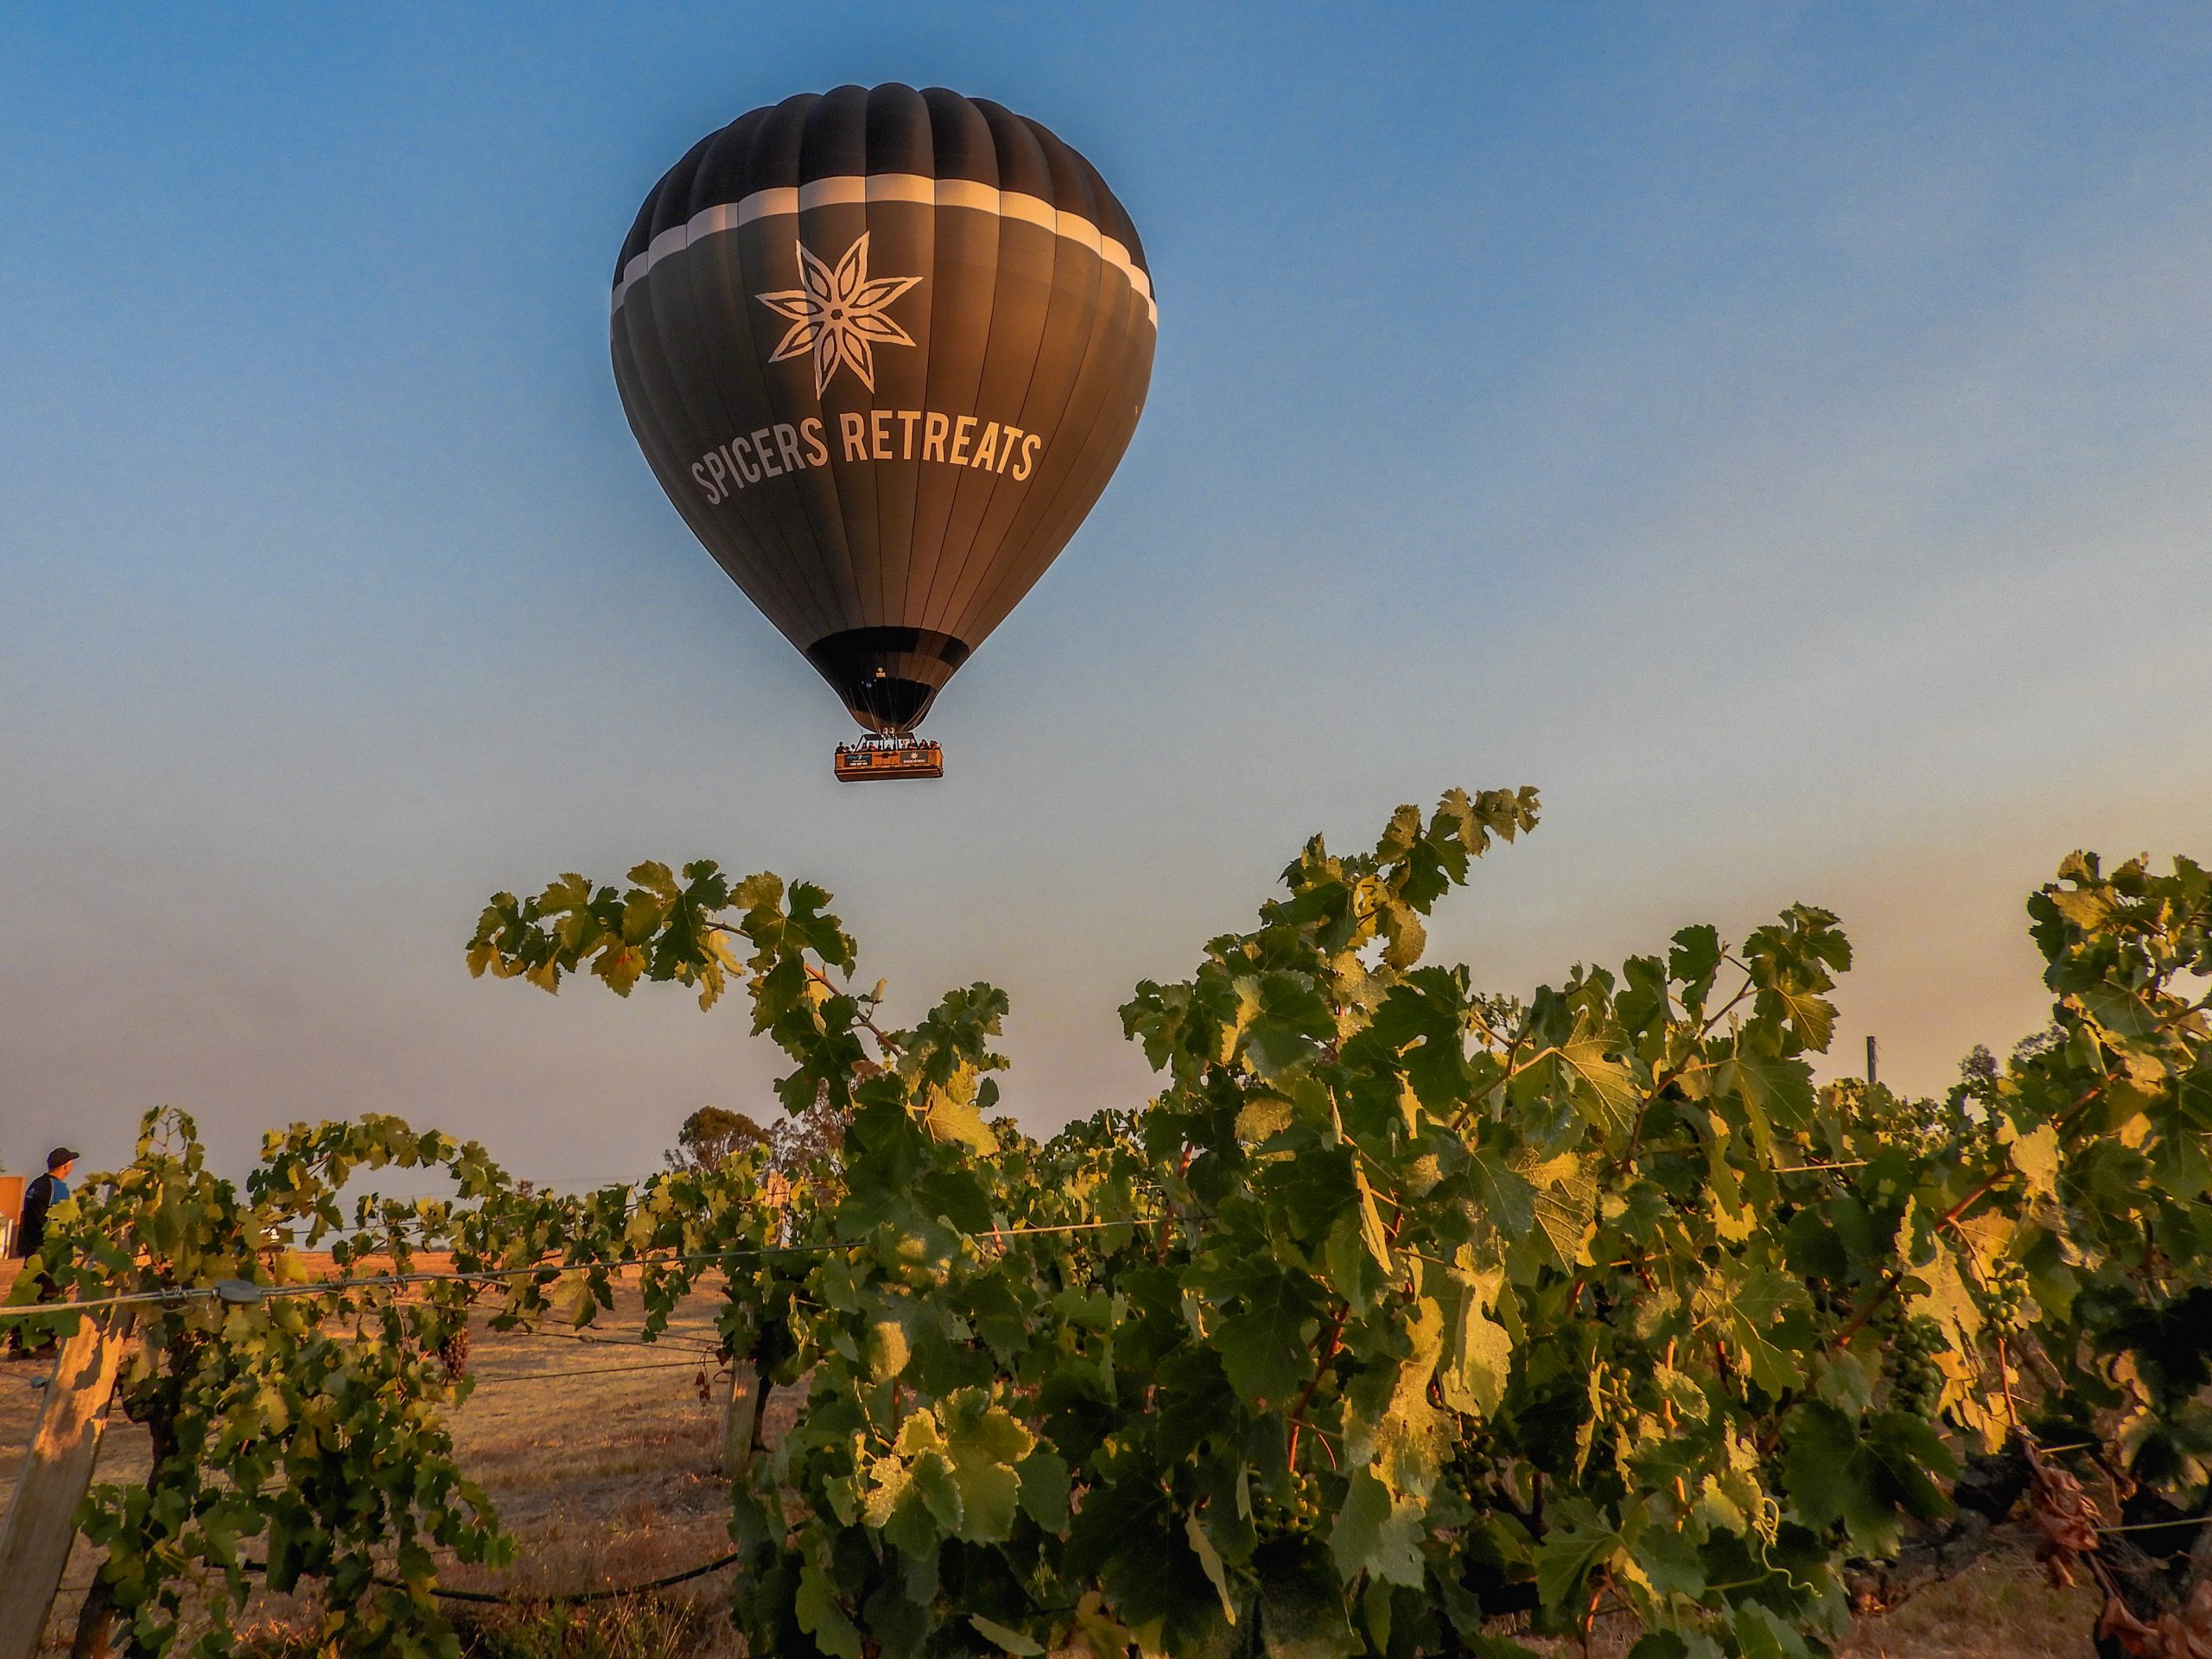 spicers retreats hot air balloon flying over a vineyard